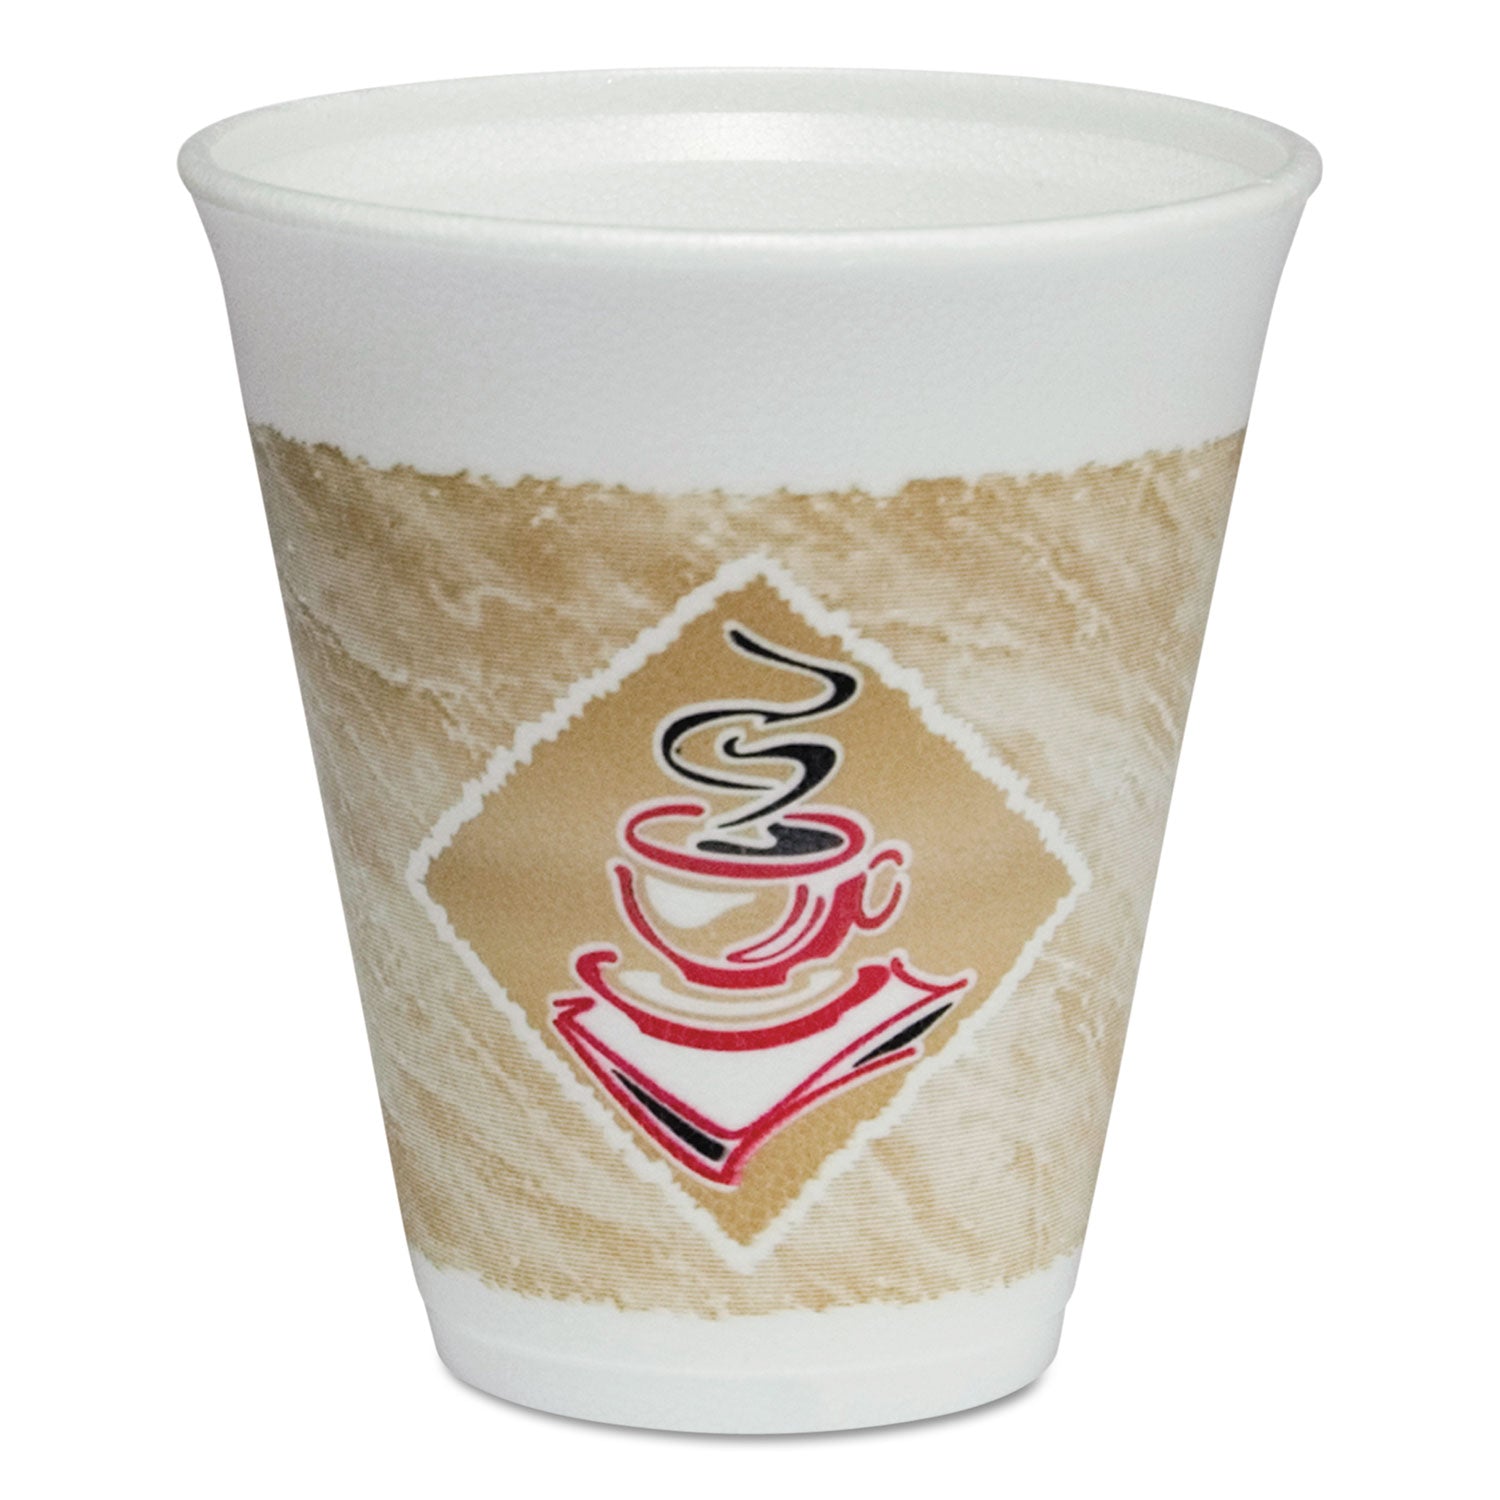 Cafe G Foam Hot/Cold Cups, 12 oz, Brown/Red/White, 20/Pack - 